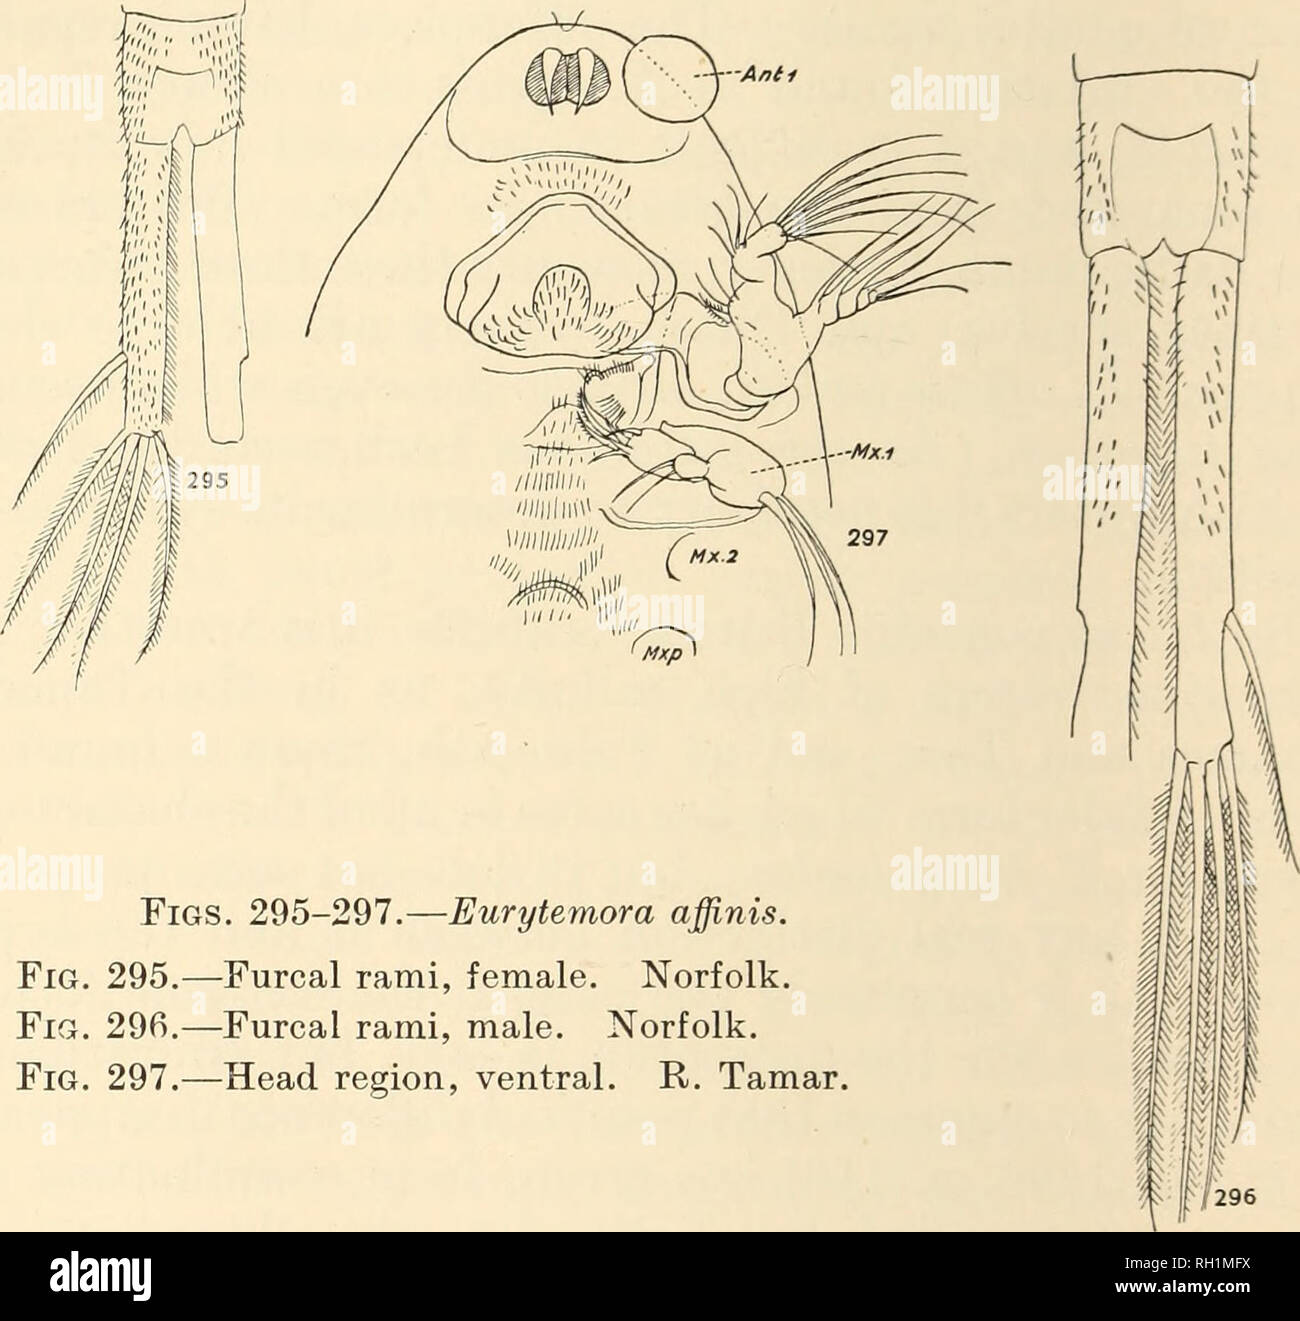 . British fresh-water Copepoda. --. Copepoda; Crustacea. 208 BRITISH FRESH-WATER COPEPODA. 7. Swimming-legs more slender. 8. Egg-sac with few eggs. De Lint (1922b, p. 82) adds, as the most important distinction: 9. Greatest width in head region, instead of middle of thorax as in E. affinis.. Taking these points in order : 1. So far as size is concerned there is every gradation, and in one population the range is great. For example, Falmouth (females) -94-1-41 mm. ; R. Bure, 1-2-1-7 mm. ; E. Tees, 1-4-1-9 mm. The only British specimens which fall within the limits given for E. hirundoides are t Stock Photo